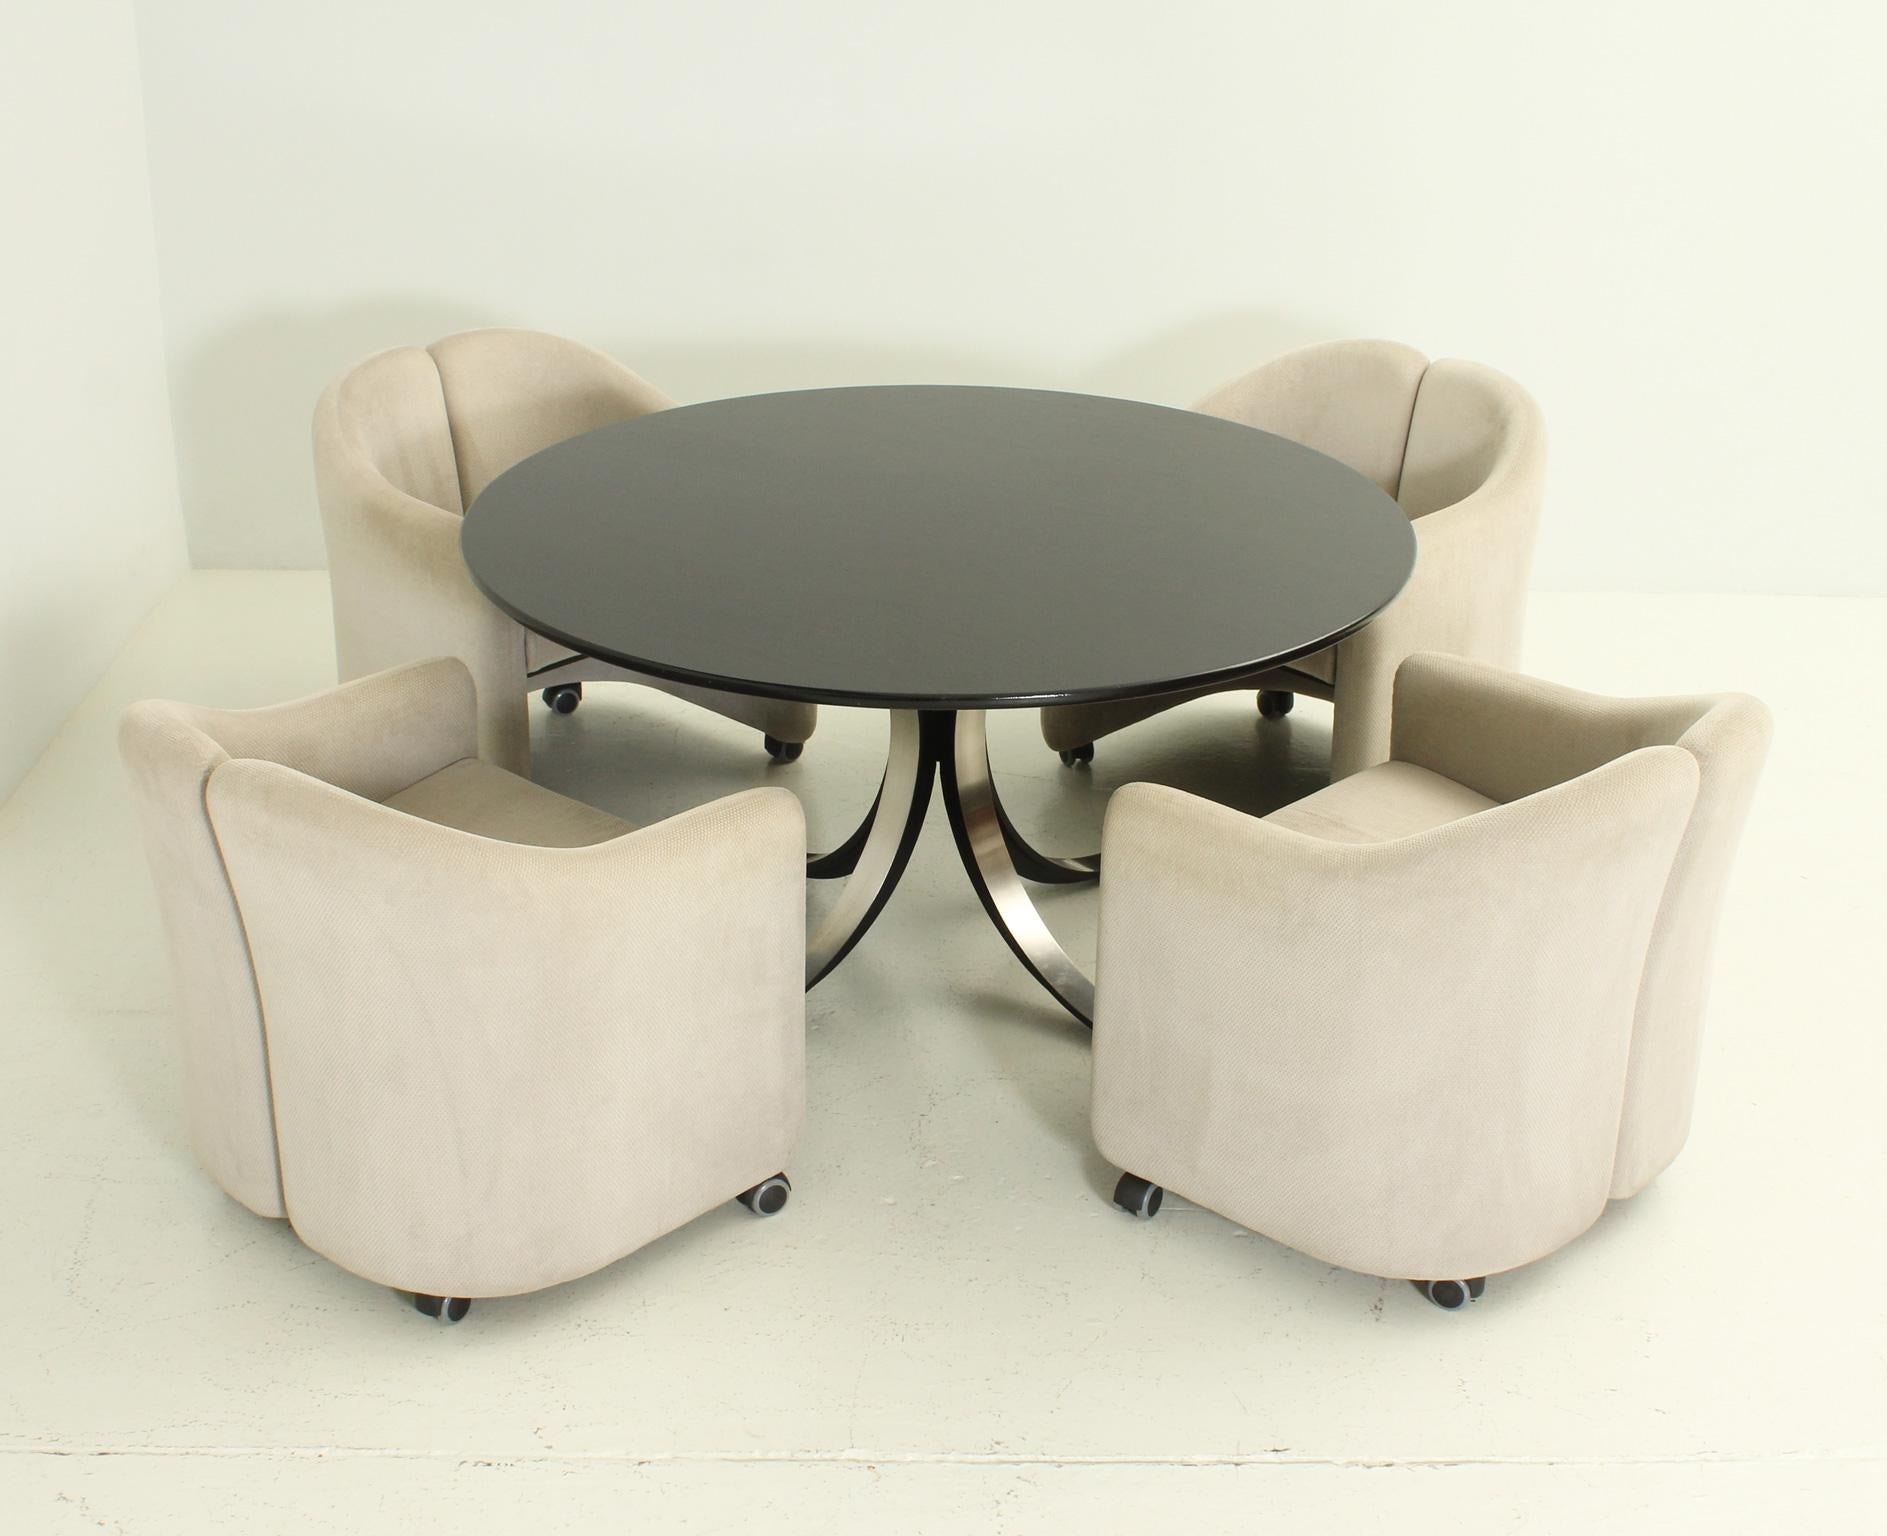 Dining or working set designed between 1966-69 by Osvaldo Borsani and Eugenio Gerli for Tecno, Italy. Composed of four PS142 armchairs and T69 table, the set was designed as a compact seating and surface system for working or eating. Table in